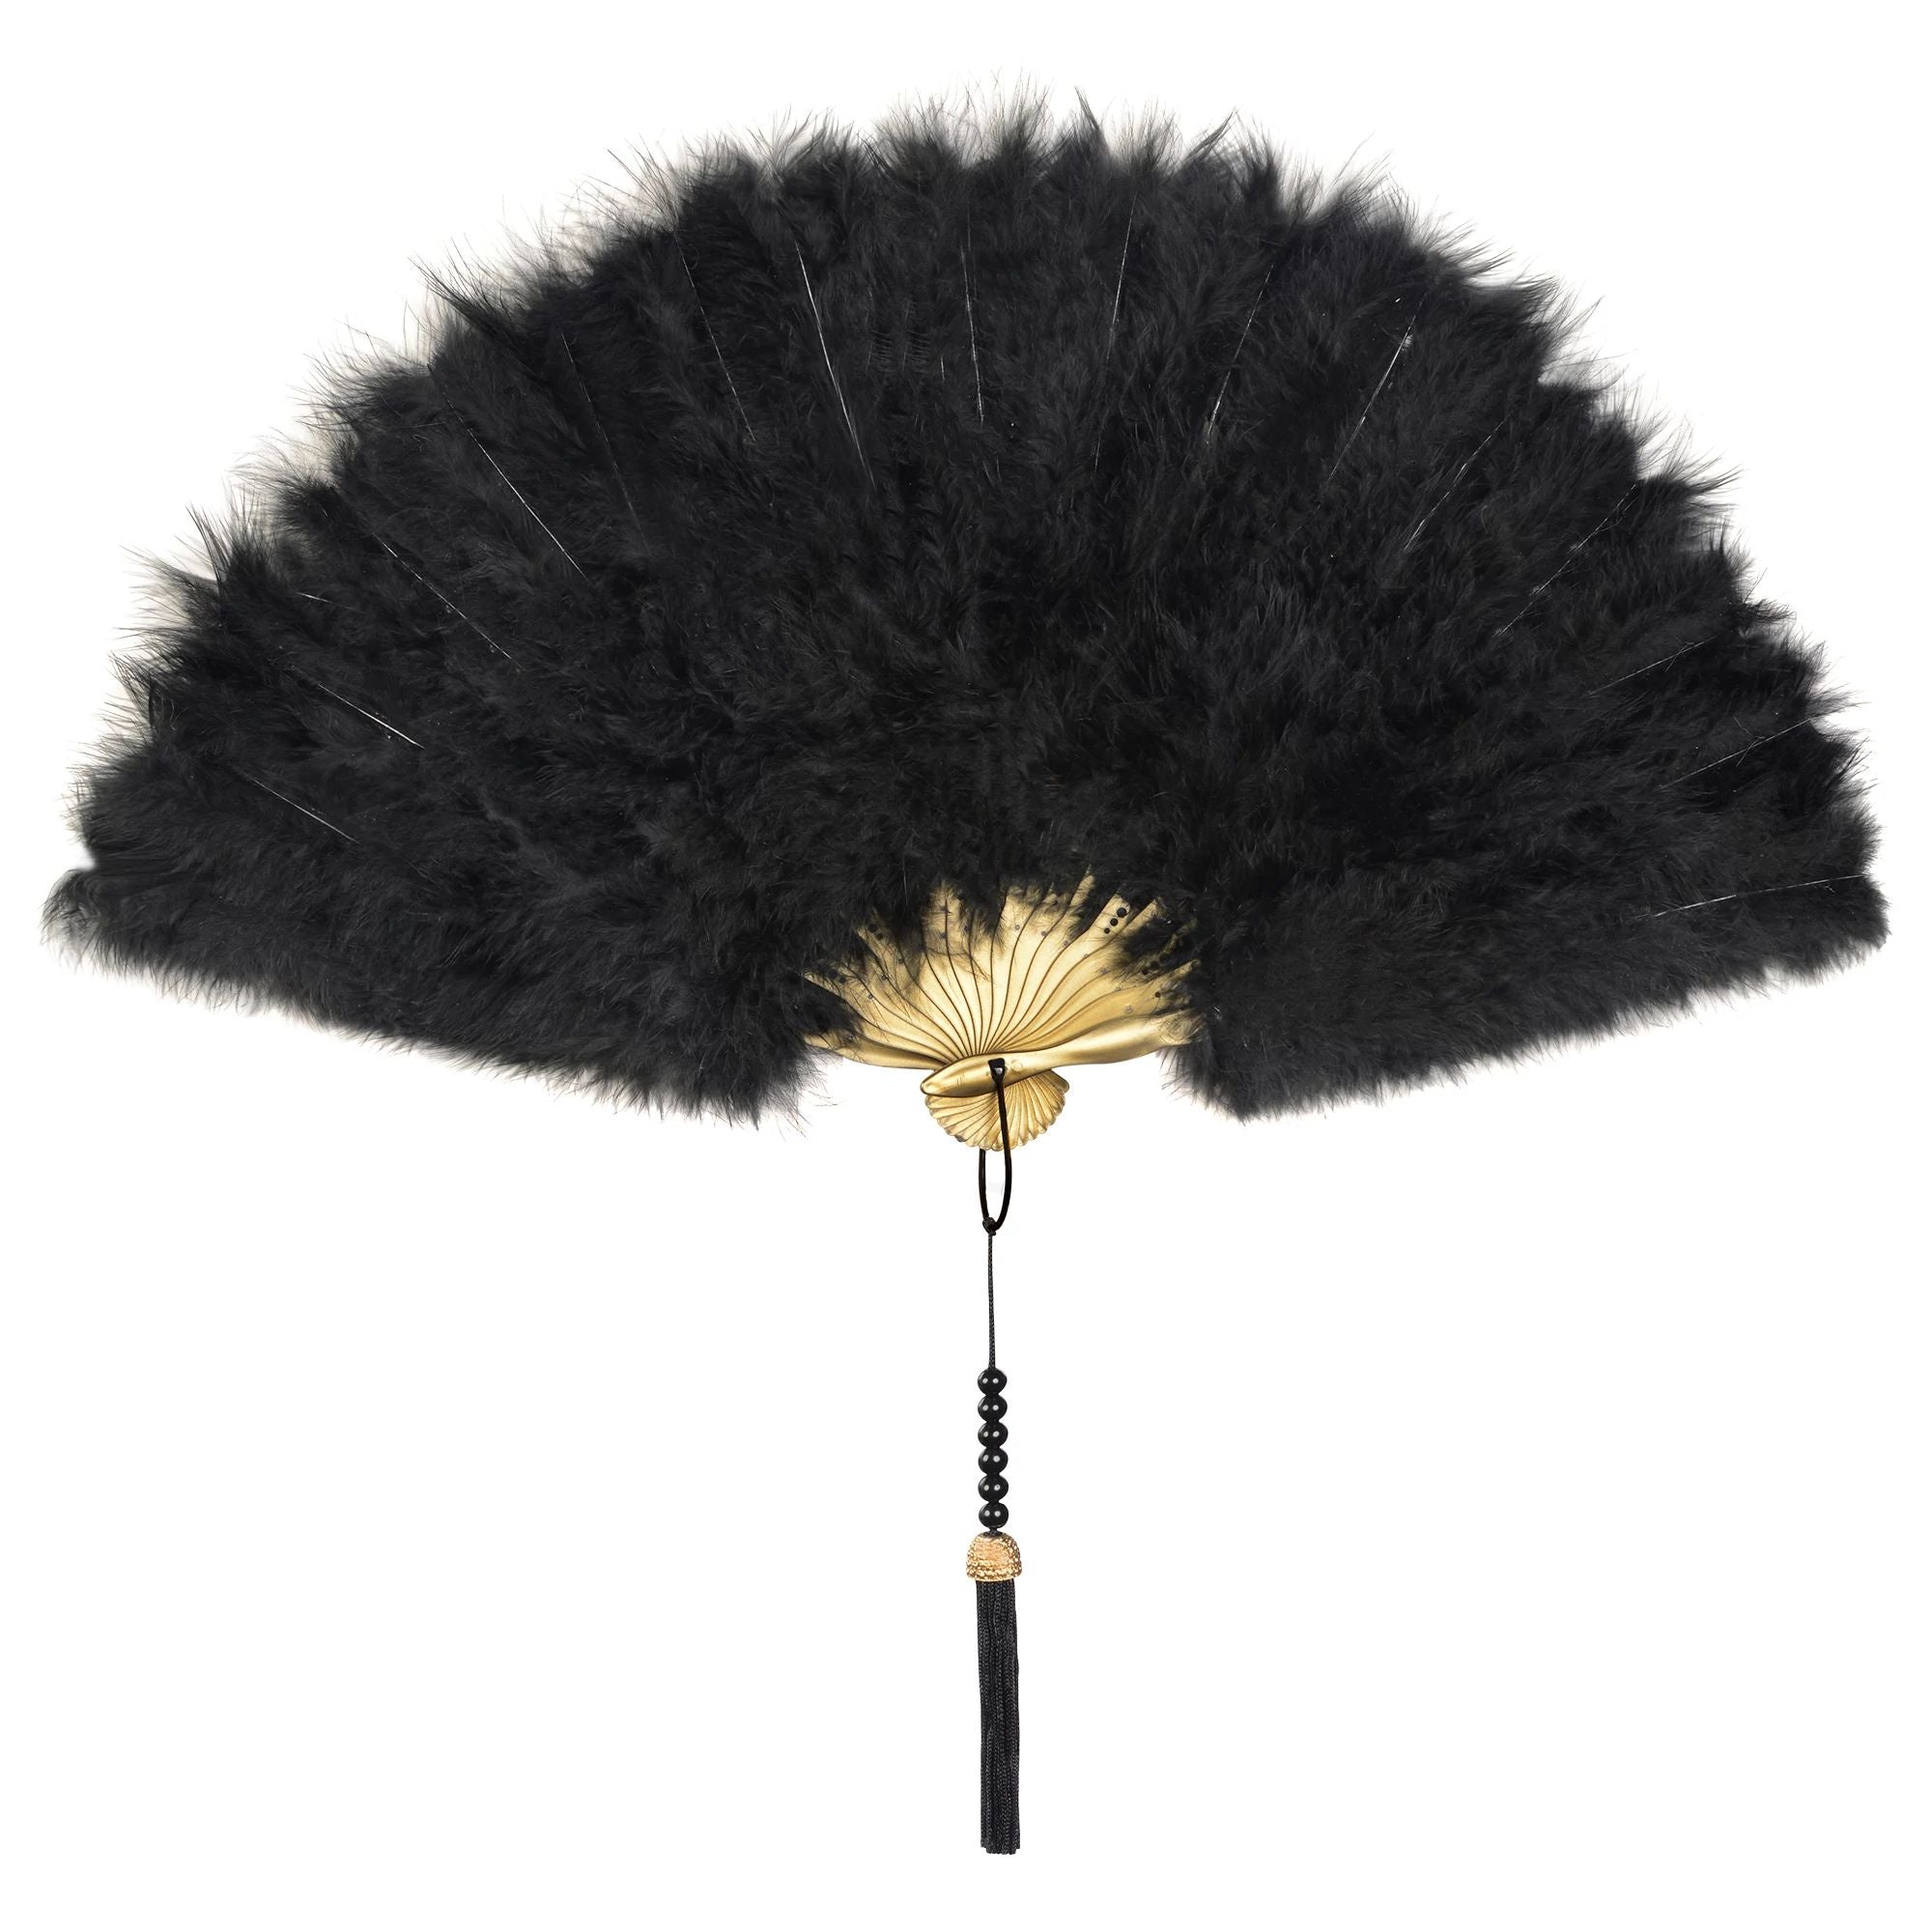 Amscan COSTUMES: ACCESSORIES Feathered Fan